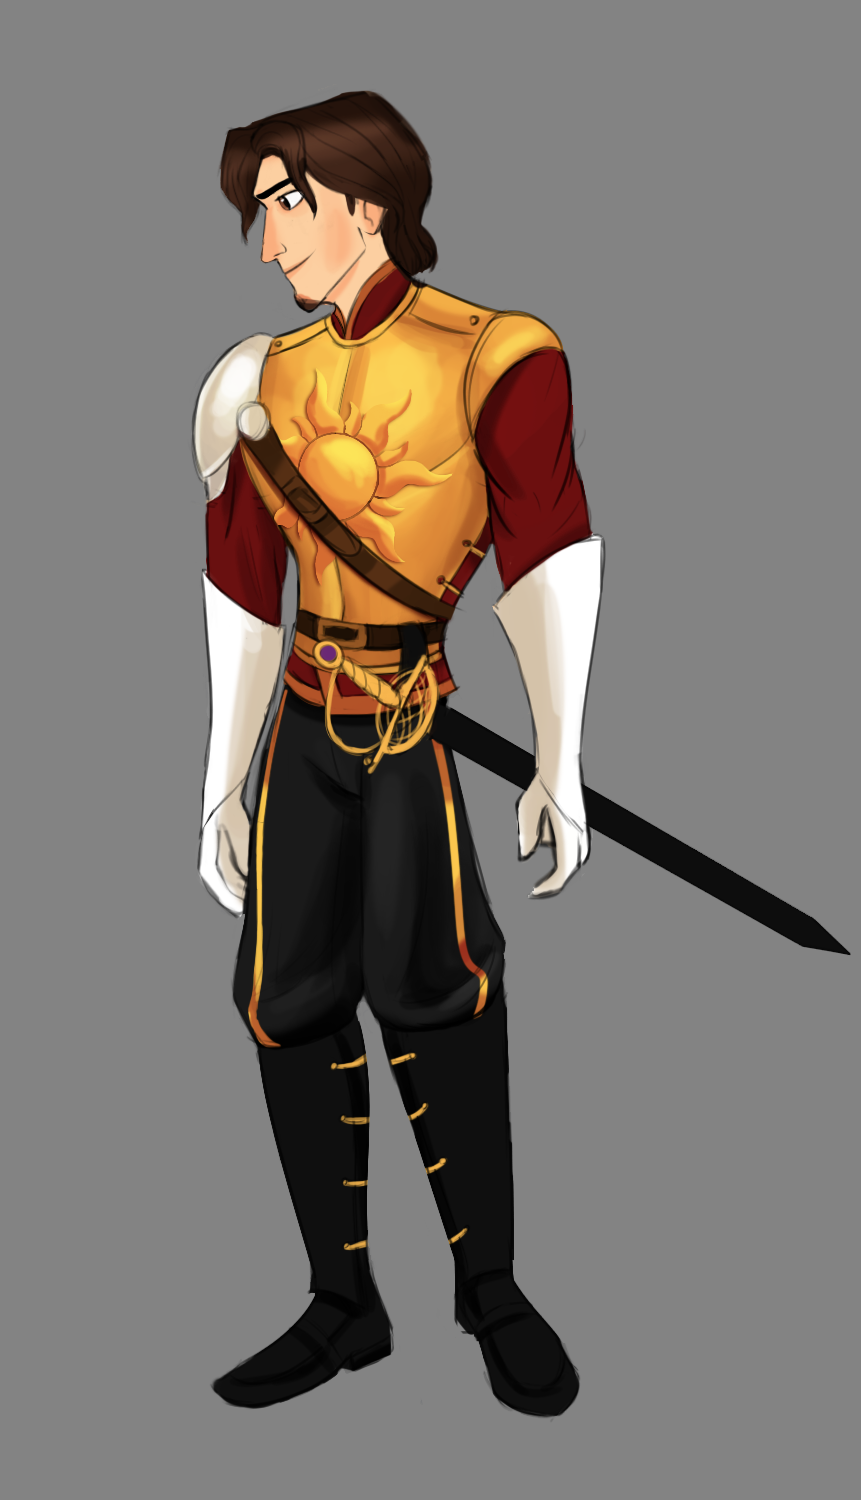 this ain’t done yet, but still a version of eugene’s guard armor (but with extra features). Might experiment with arm/ knee 